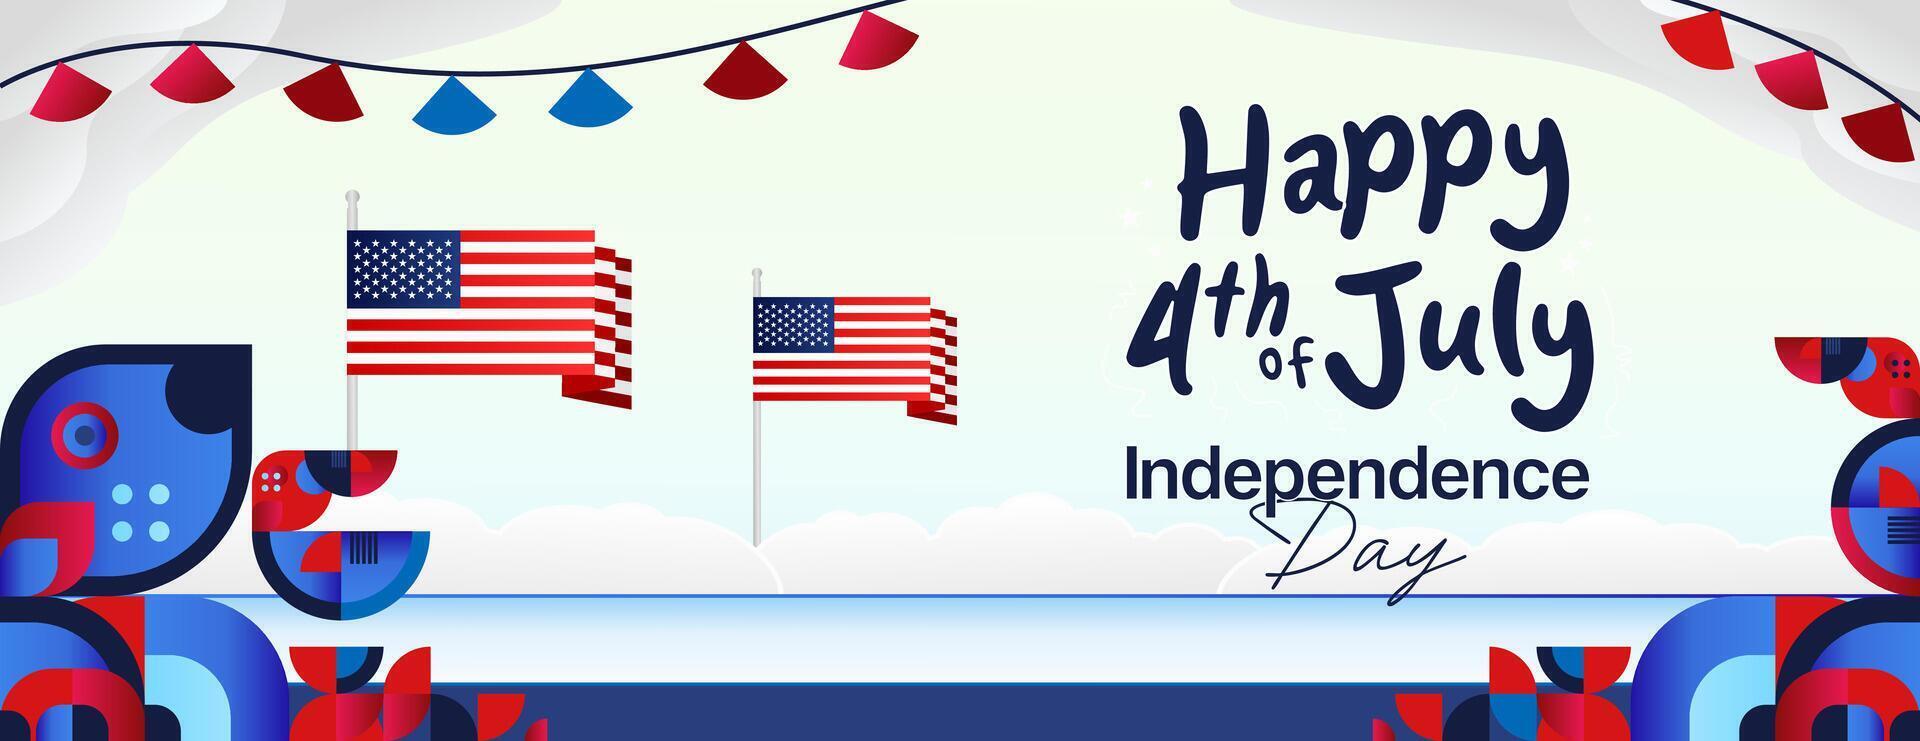 United States Independence Day wide banner in colorful modern geometric style. USA National Day greeting card cover on 4th of July with country flag. Illustration celebrating national holidays vector